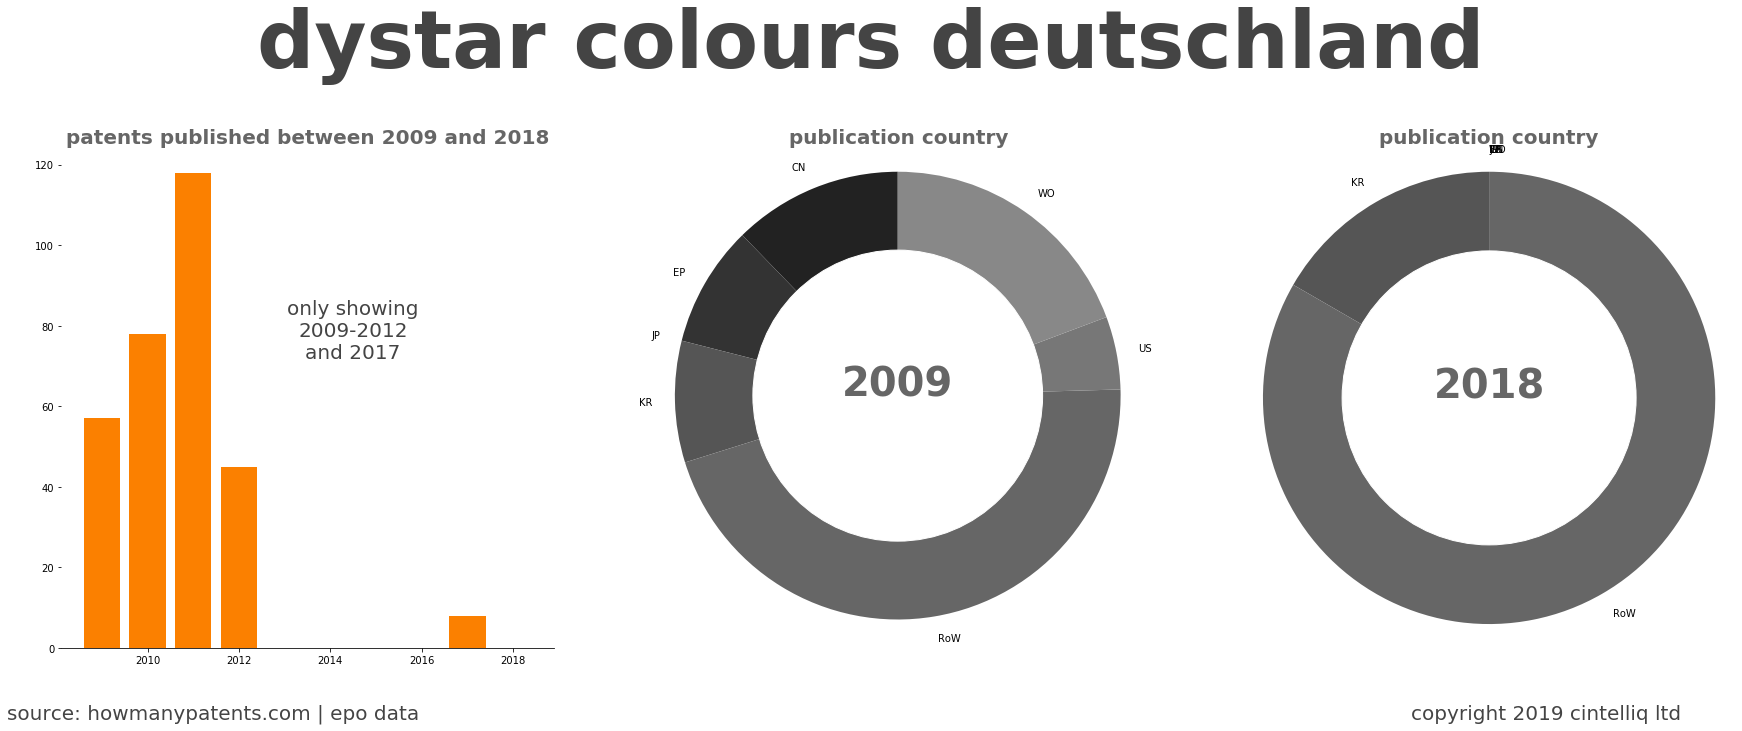 summary of patents for Dystar Colours Deutschland